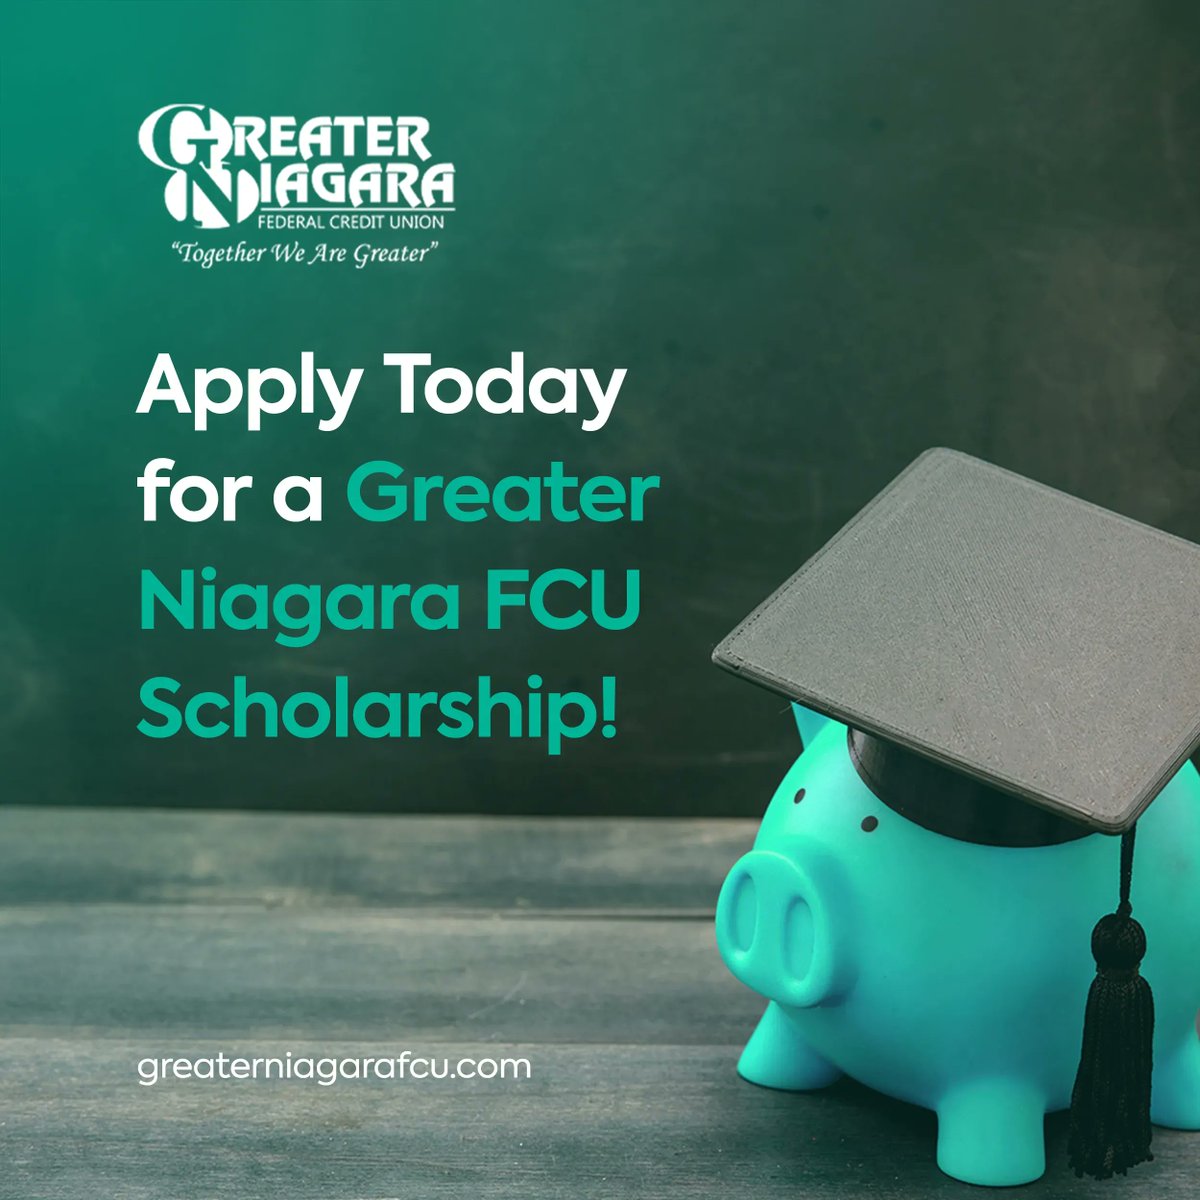 🚨Calling all #highschool #seniors! Join the Greater Niagara #FCU #scholarship opportunity. We’re proudly offering two $500 scholarships to seniors attending a #college, #university, or #technicalschool in the Fall of #2023! 🎓 You must be a #creditunion member to apply by 3/31.